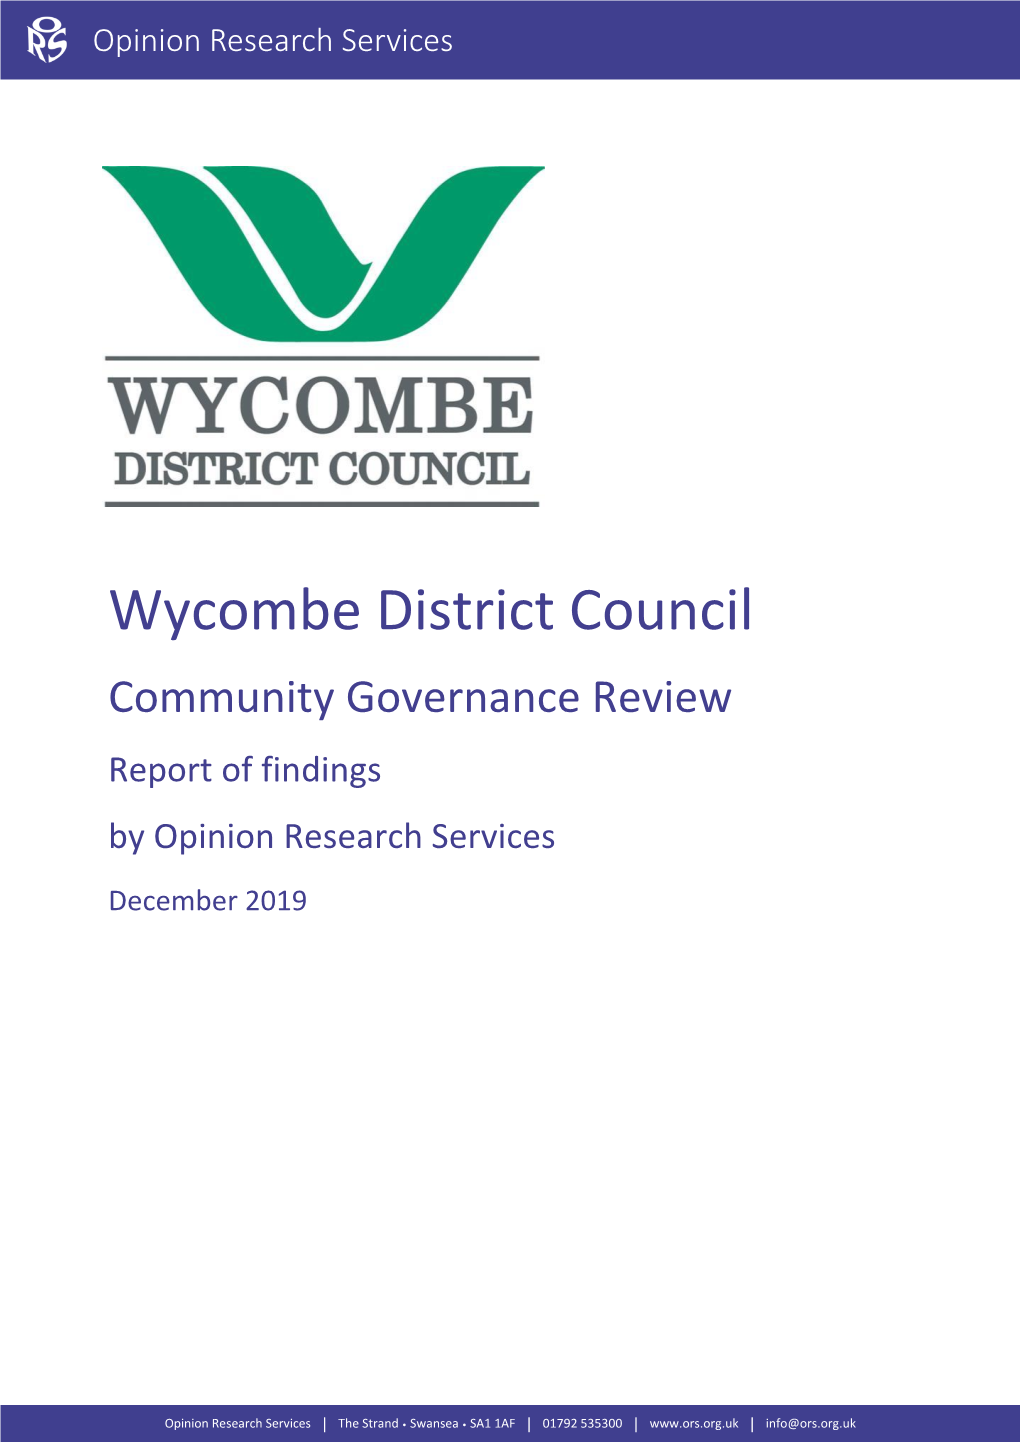 Wycombe District Council Community Governance Review Report of Findings by Opinion Research Services December 2019